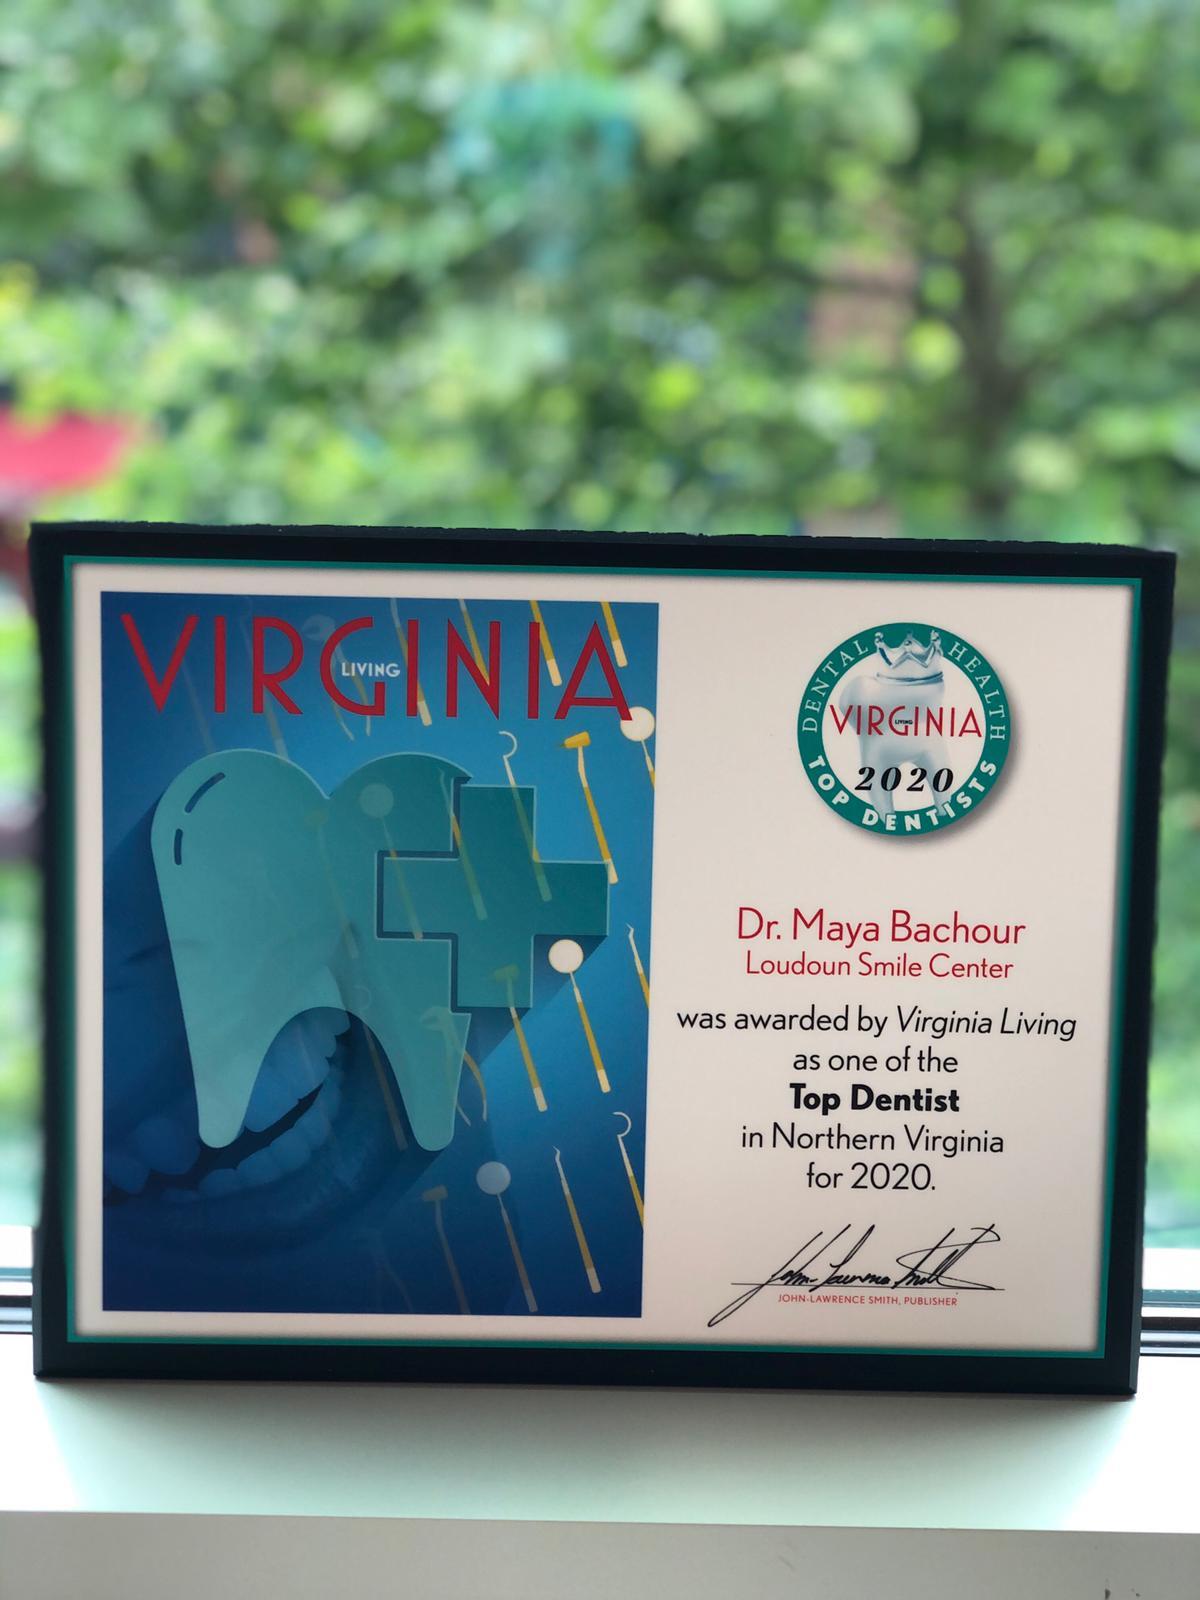 Just One of the Many Awards Given to Dr. Bachour and Loudoun Smile Center